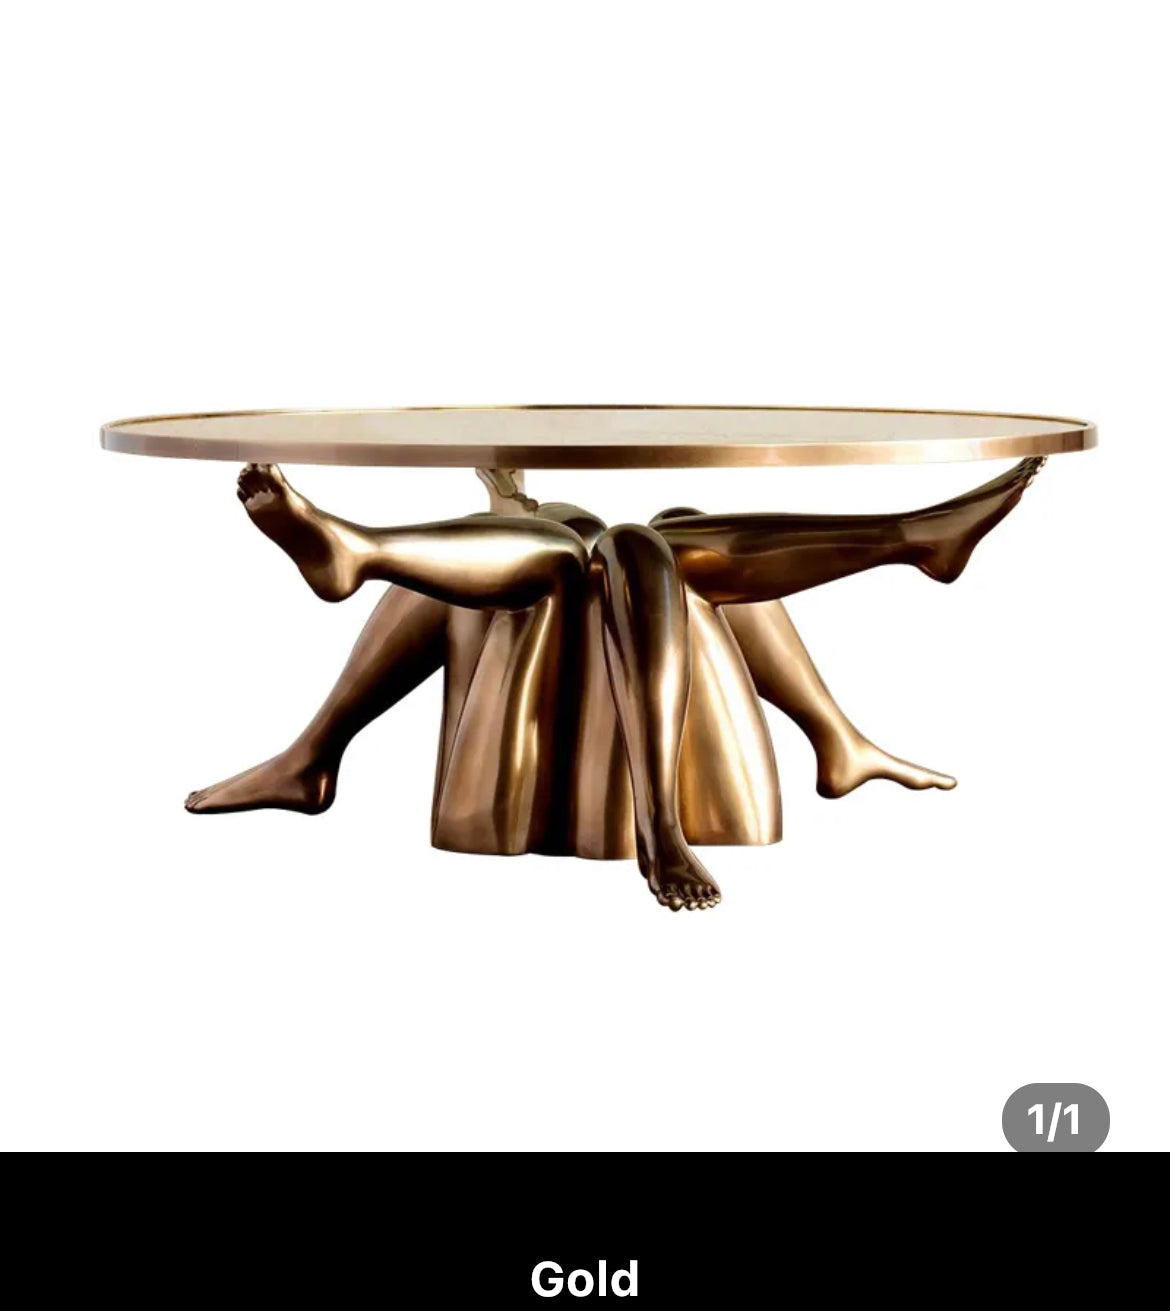 Art Glass Center Table Living Room Unique Nordic Design Coffee Table Glass Top Golden Legs Table 